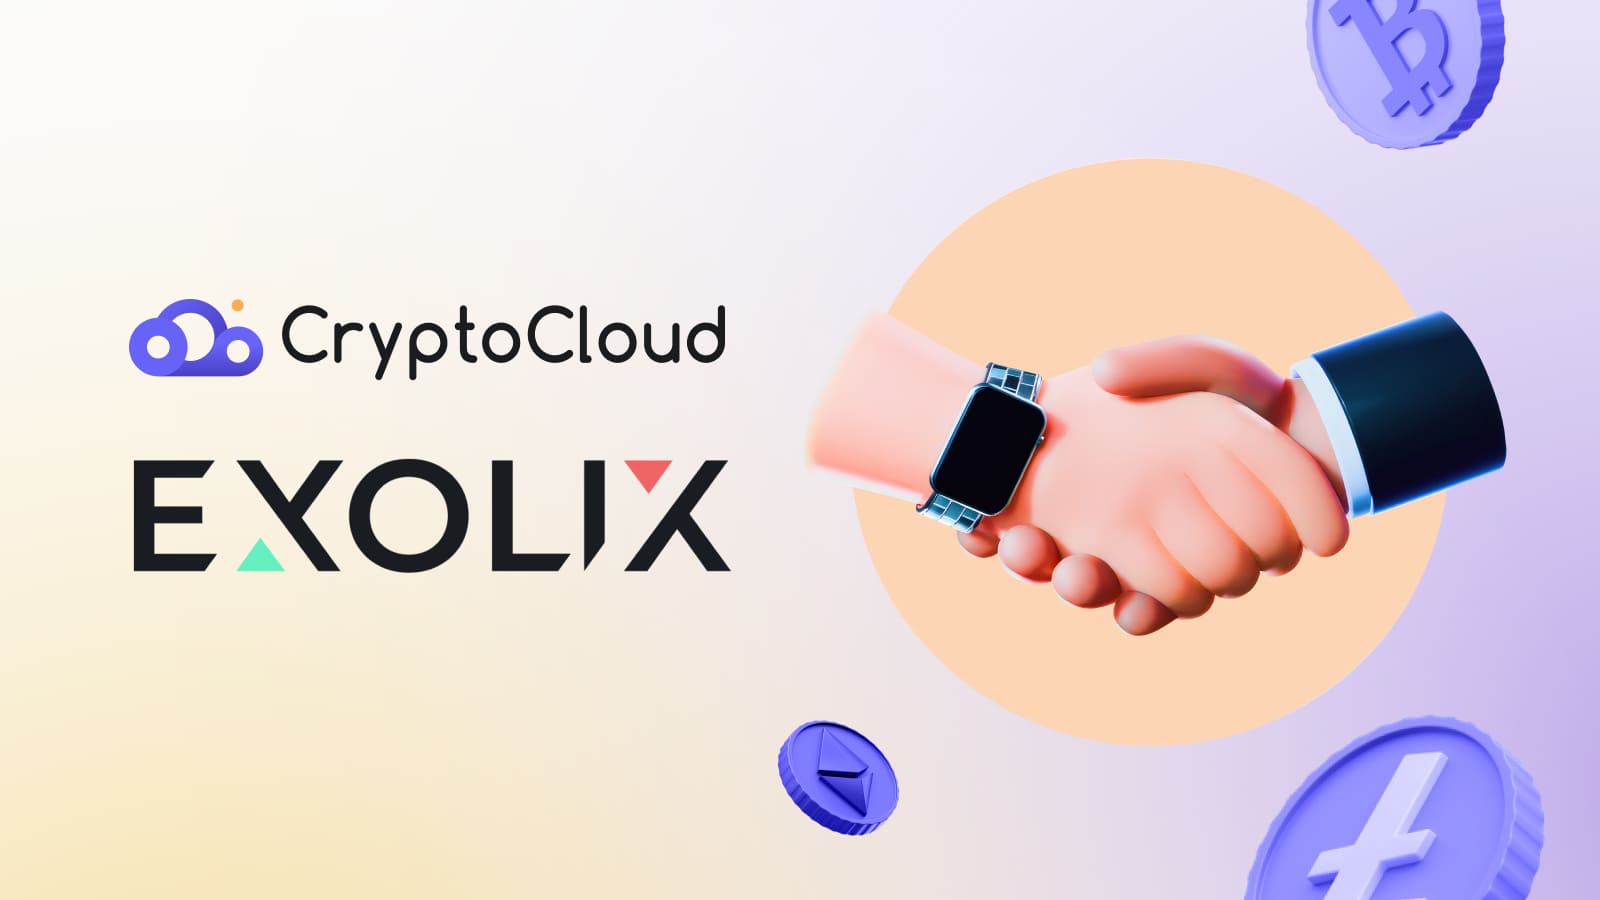 Fast and reliable exchange of 500+ cryptocurrencies via CryptoCloud and Exolix partnership.